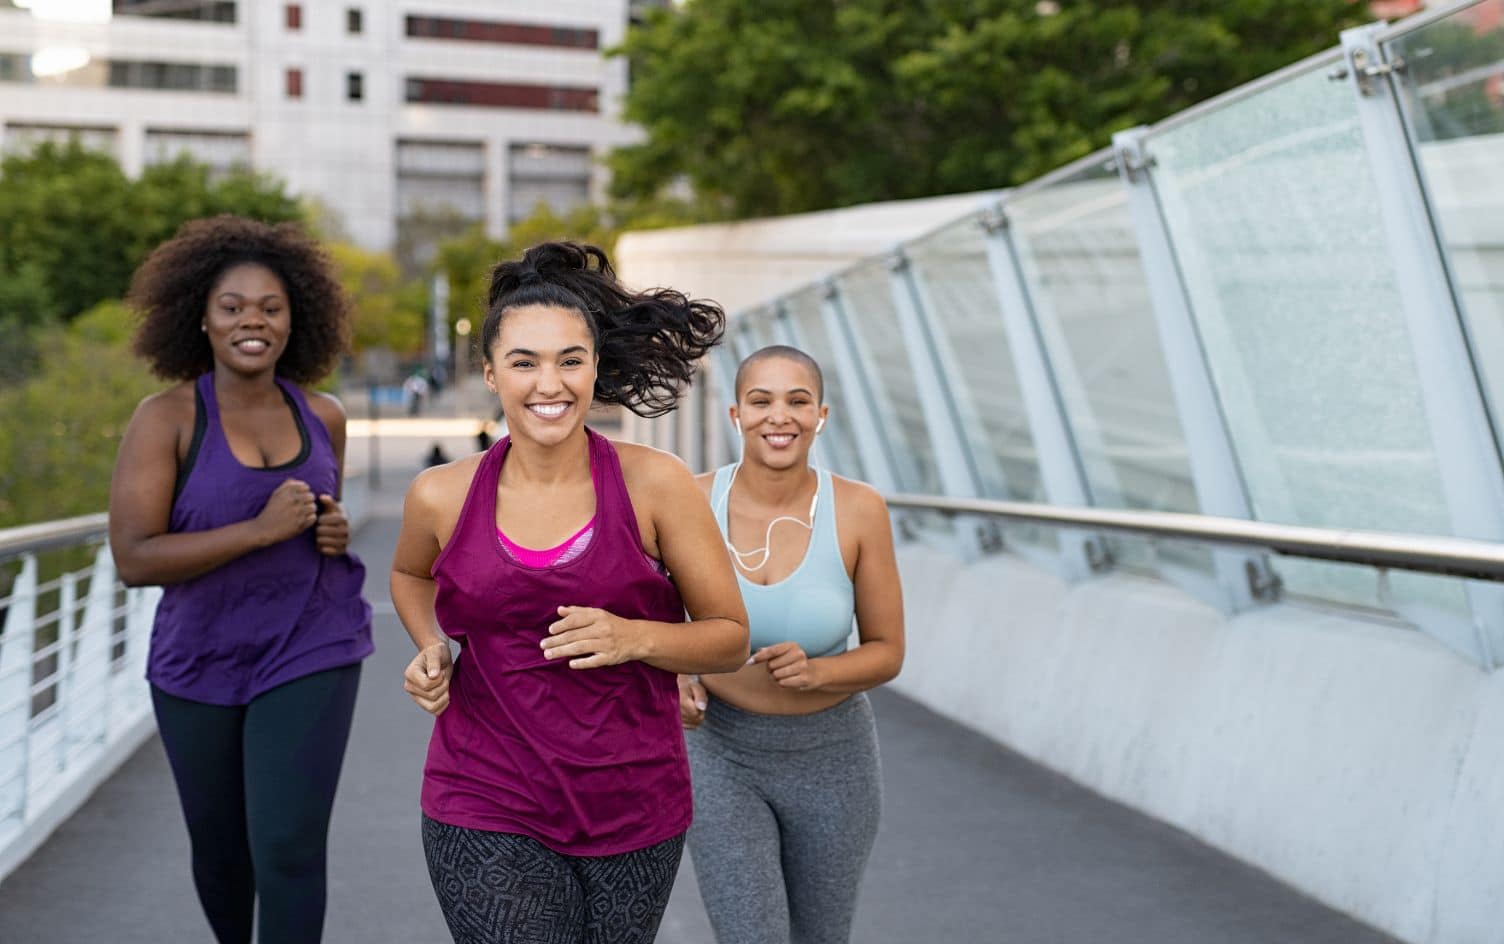 Can Exercise Fight Depression and Make You Happier